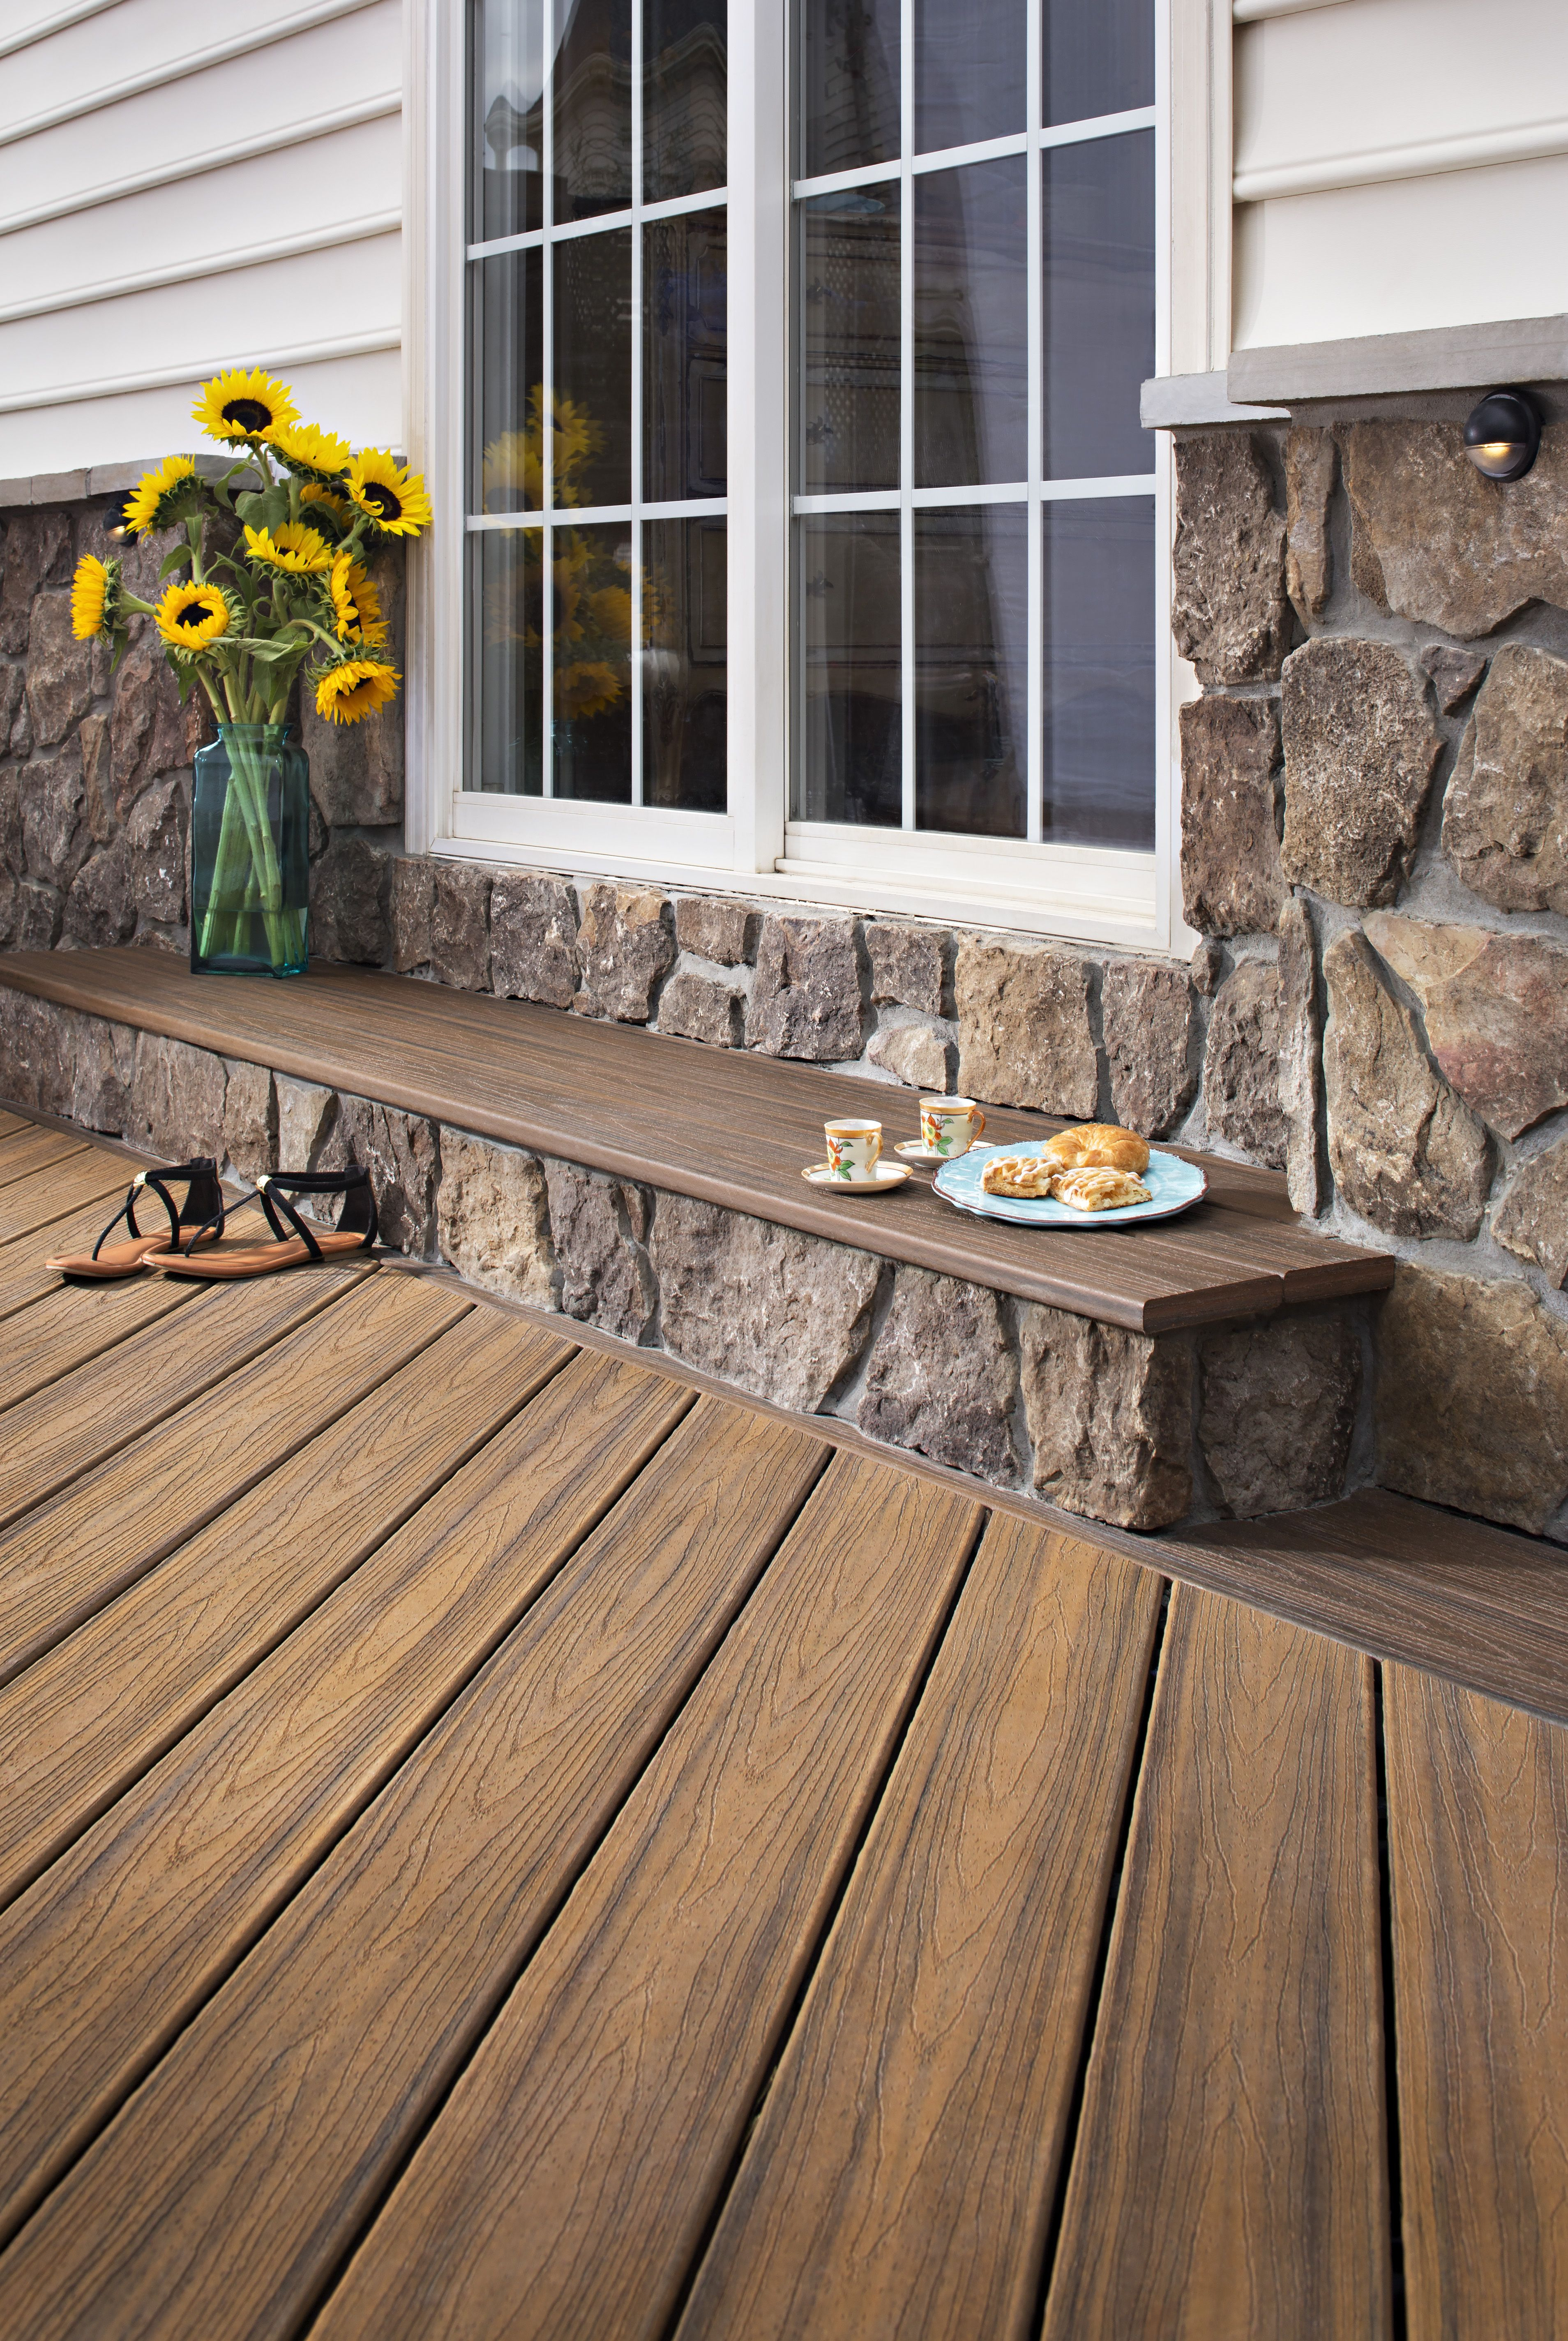 A Trex Transcend Deck In Our Havana Gold Color Makes It Easy To with dimensions 3816 X 5696